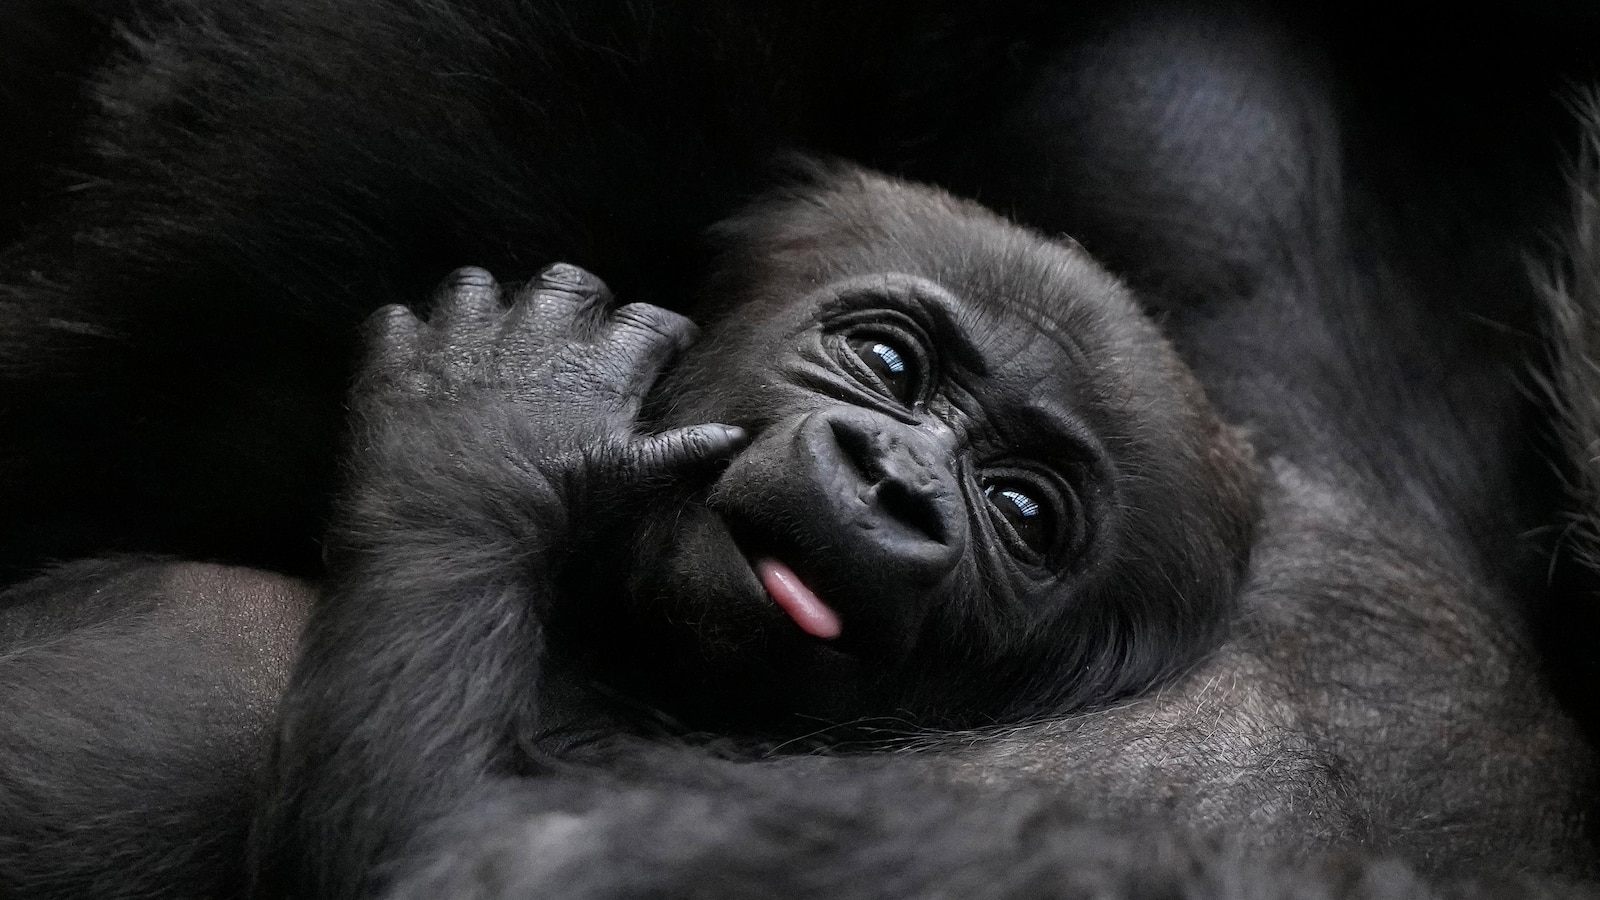 Baby gorilla cuddled by mother at London Zoo remains nameless